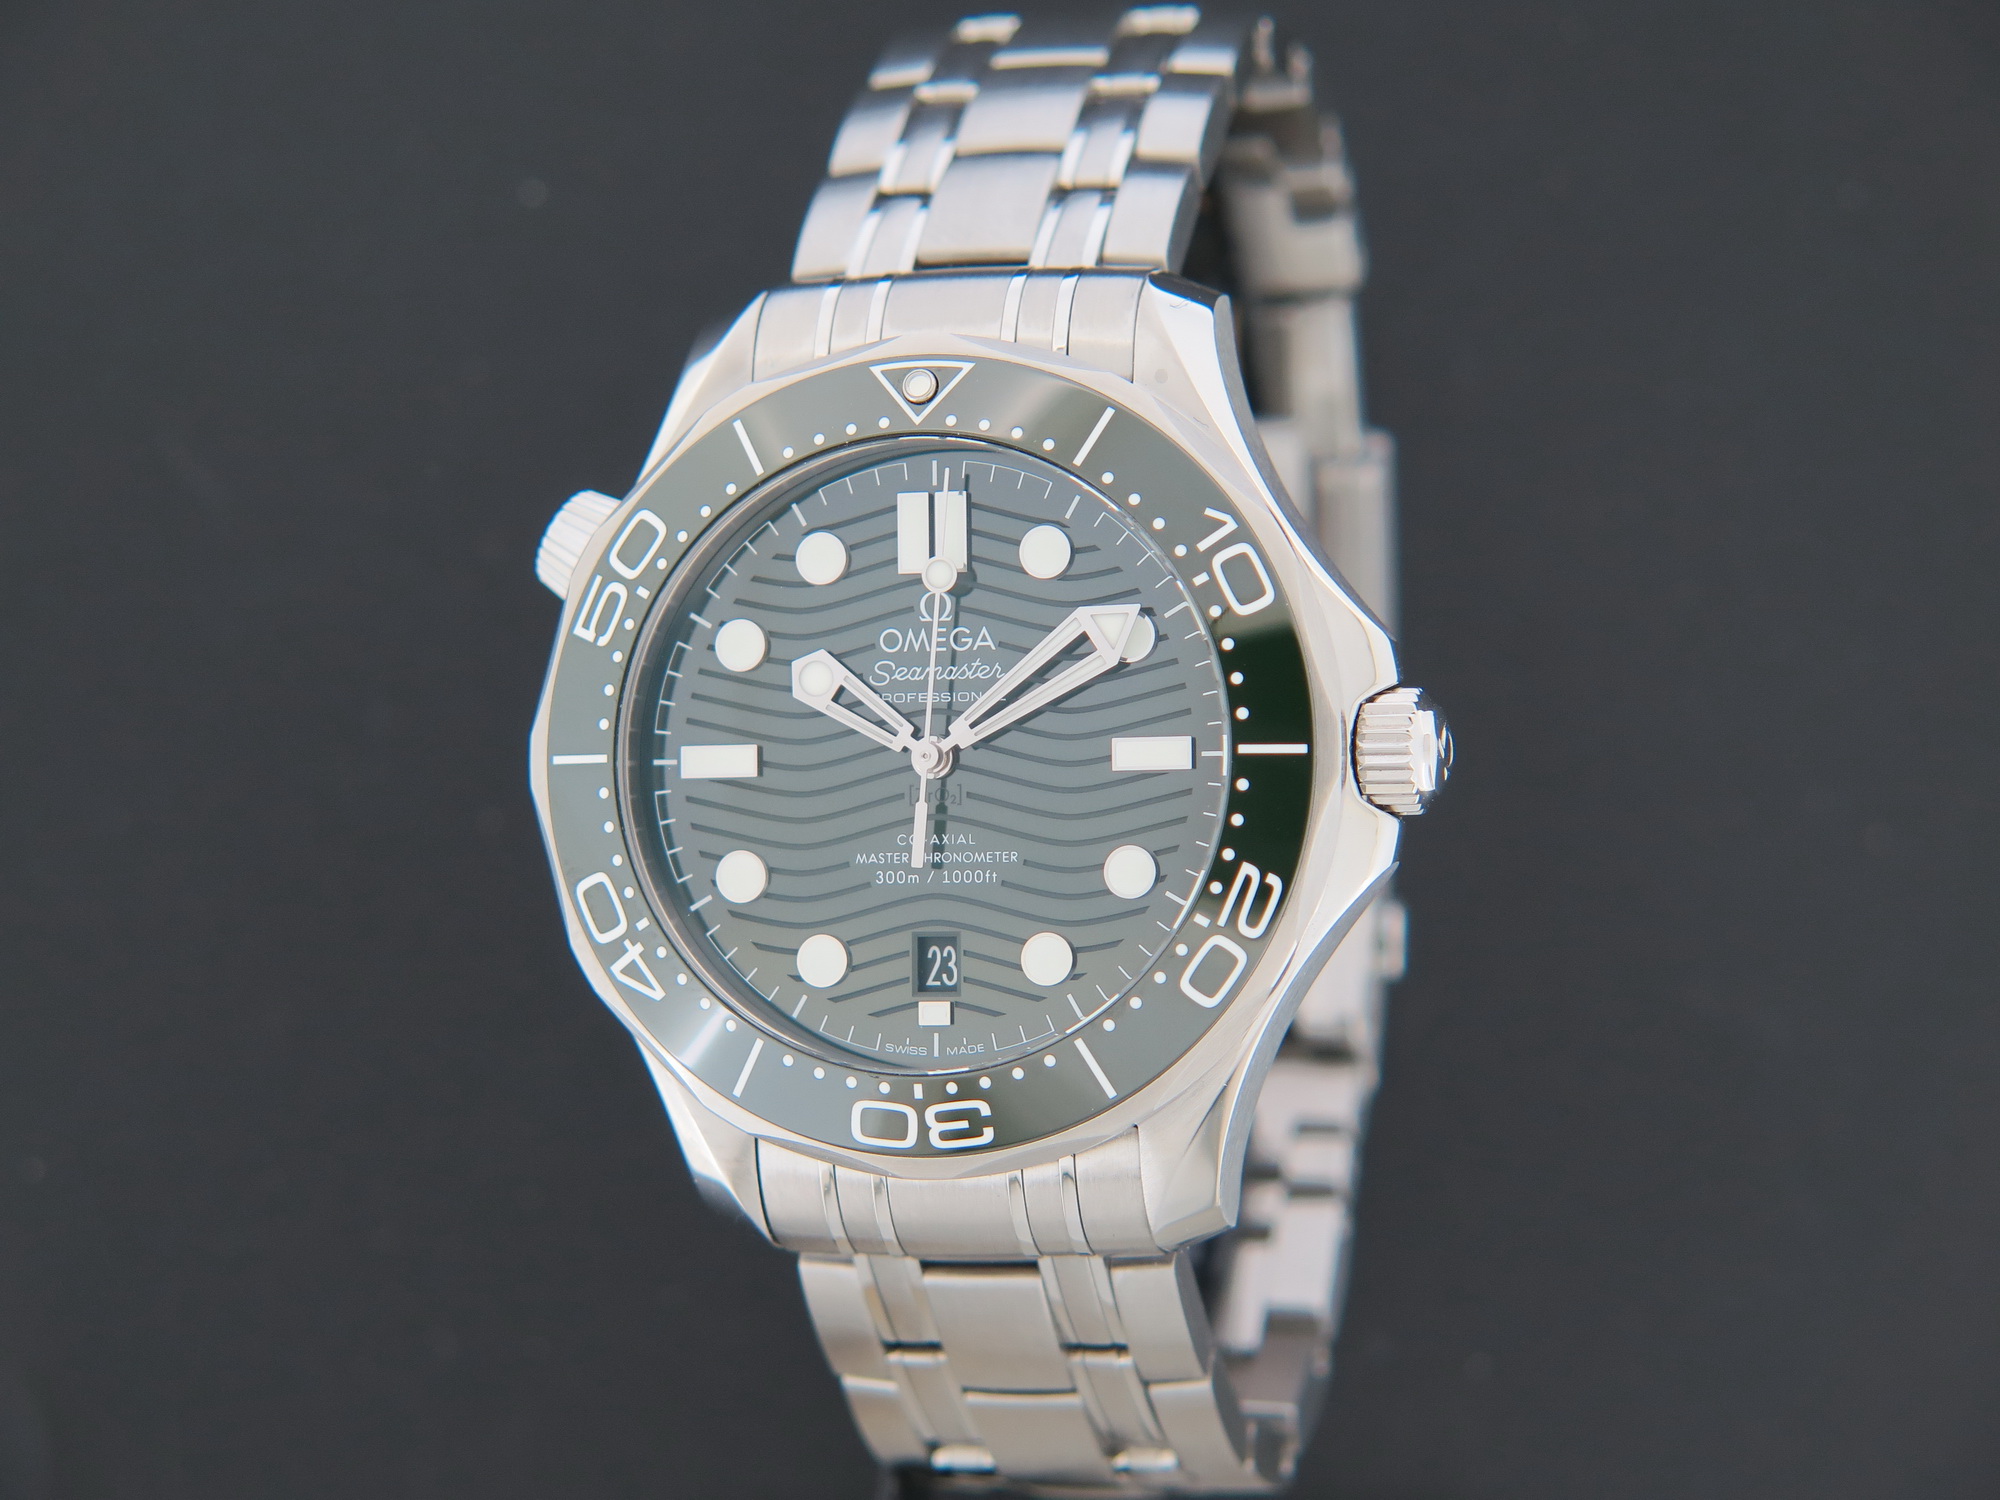 Omega Seamaster Diver 300M Co-Axial Master Chronometer Green Dial NEW 21030422010001